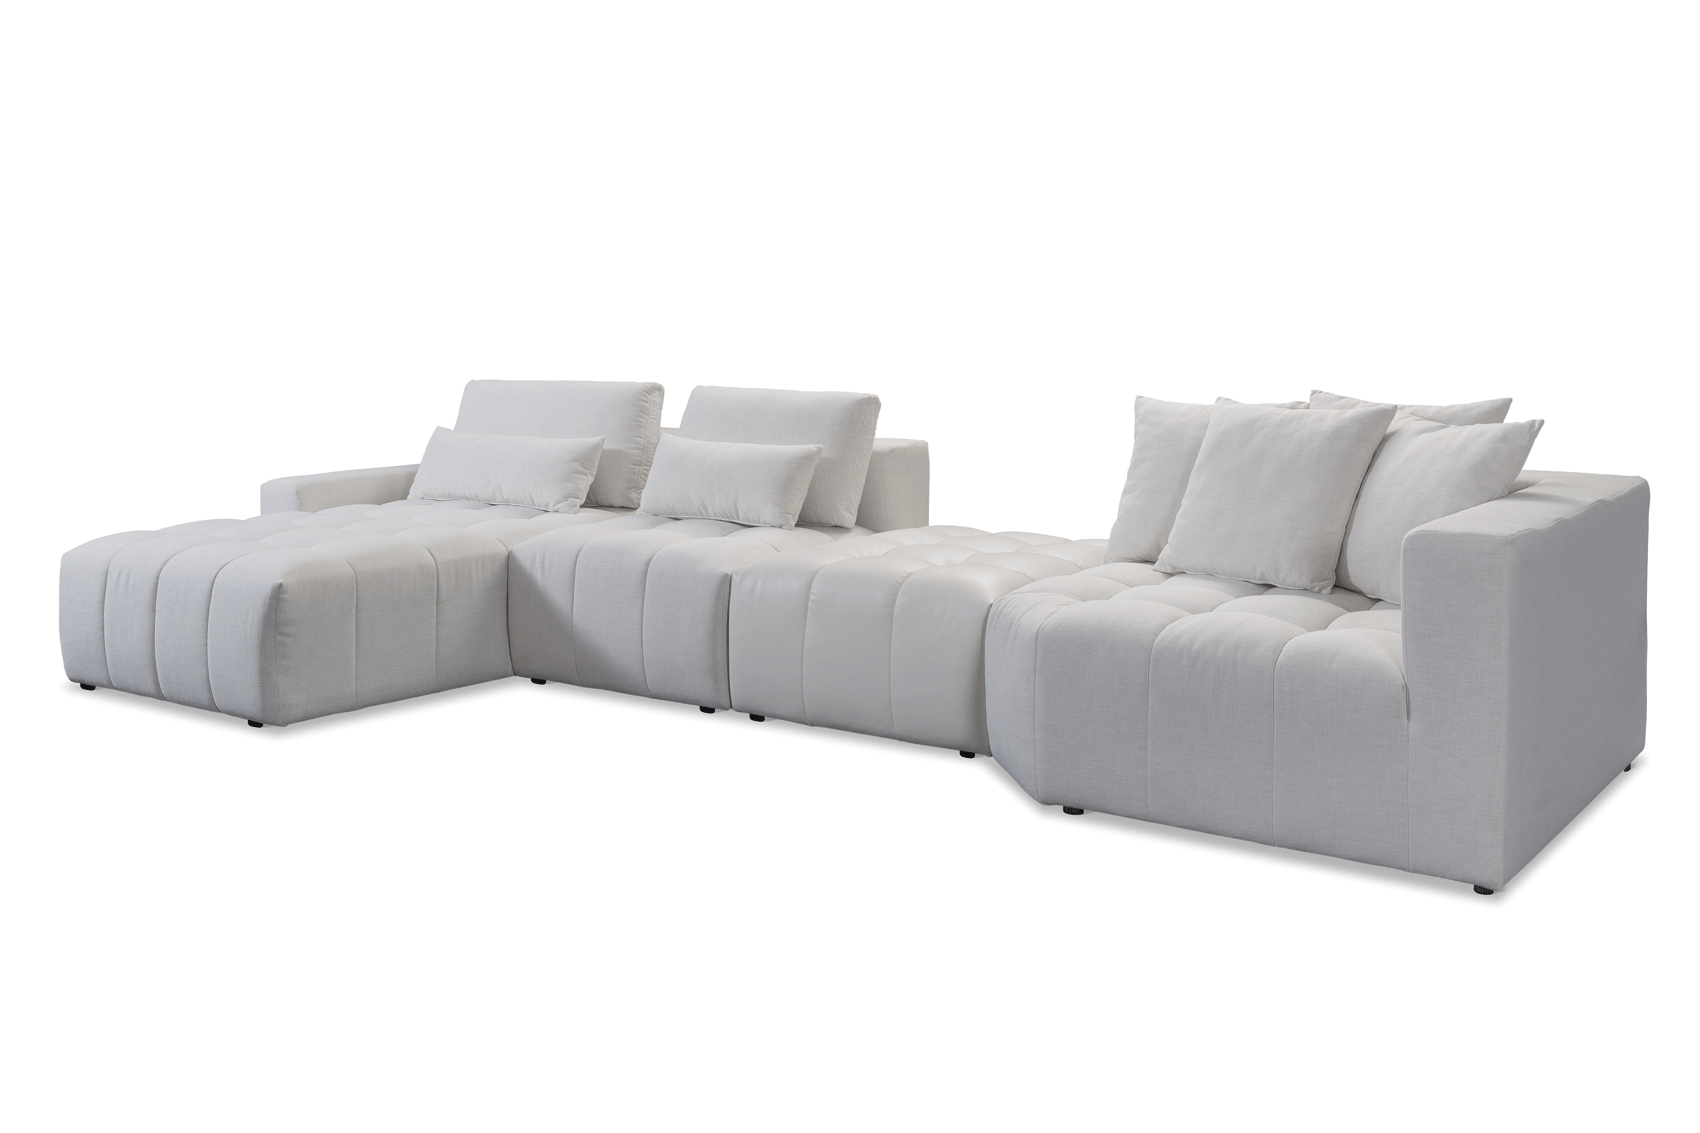 Living Room Furniture Reclining and Sliding Seats Sets Sense Sectional